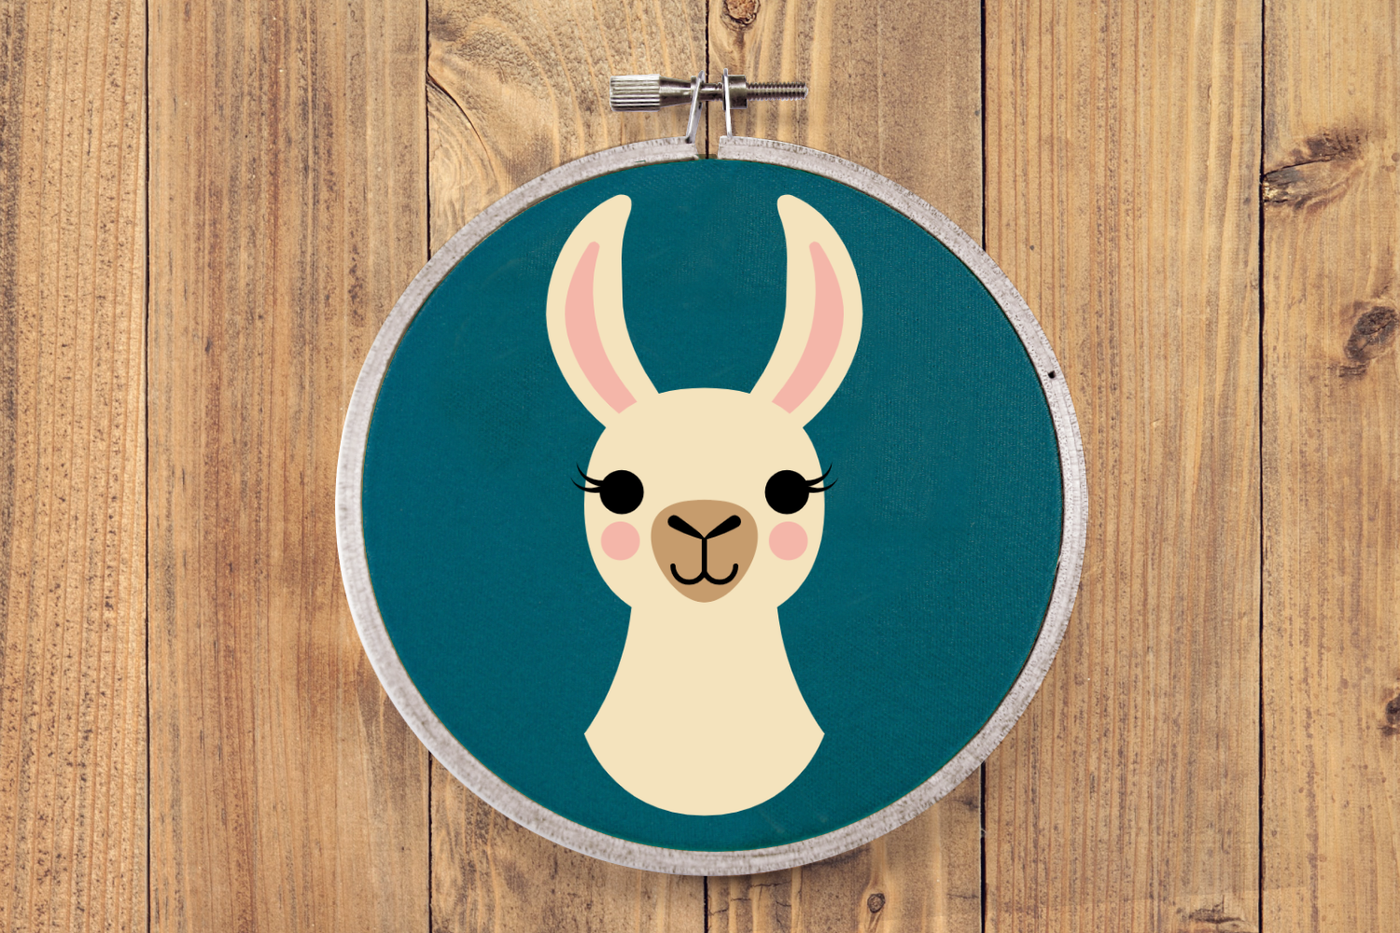 Llama design shown from the neck up.